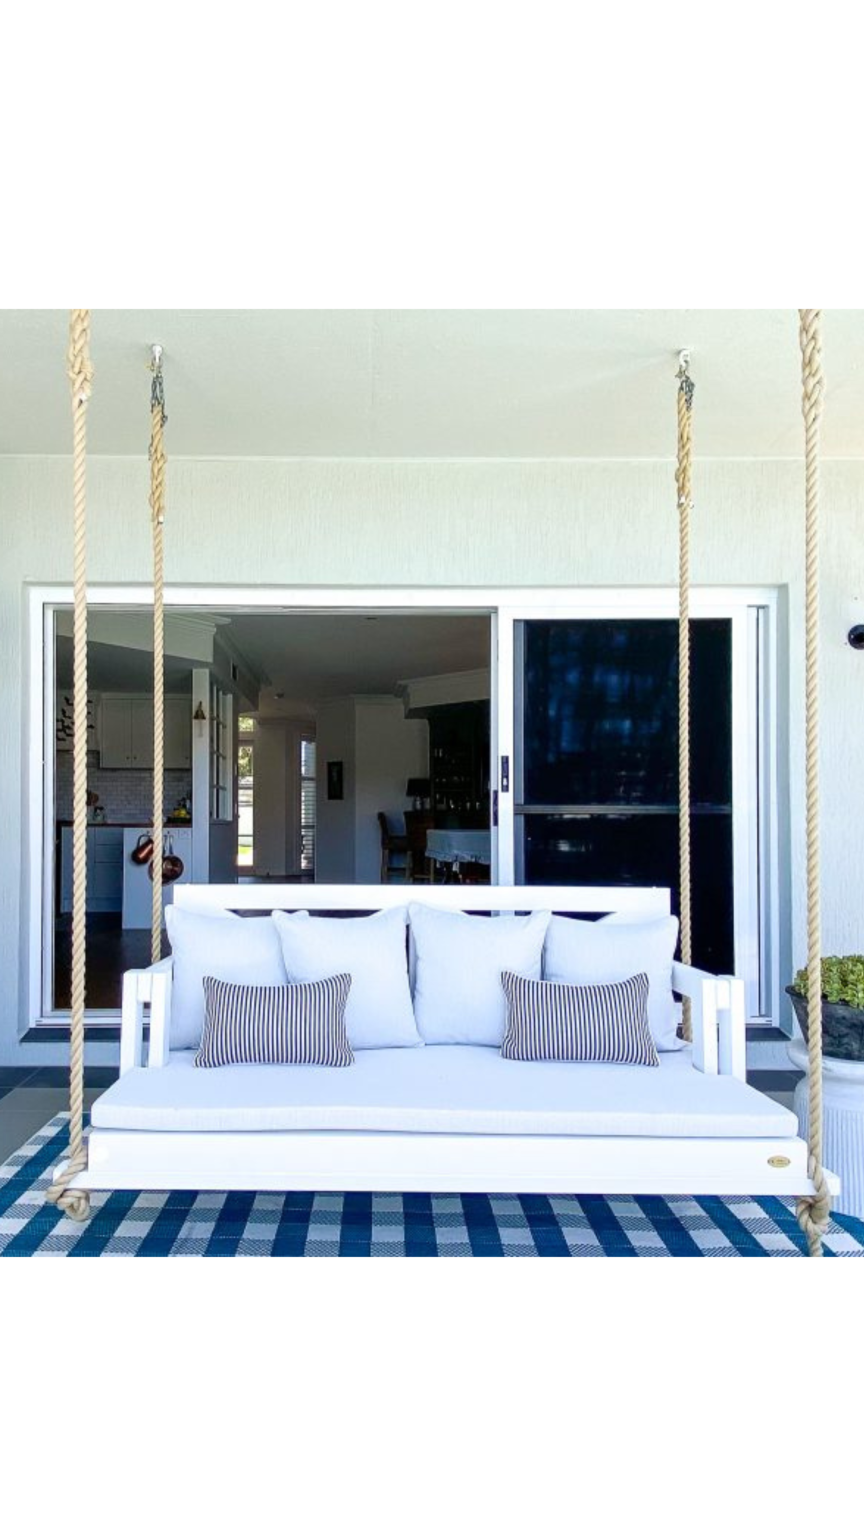 Stravage outdoor hanging daybed